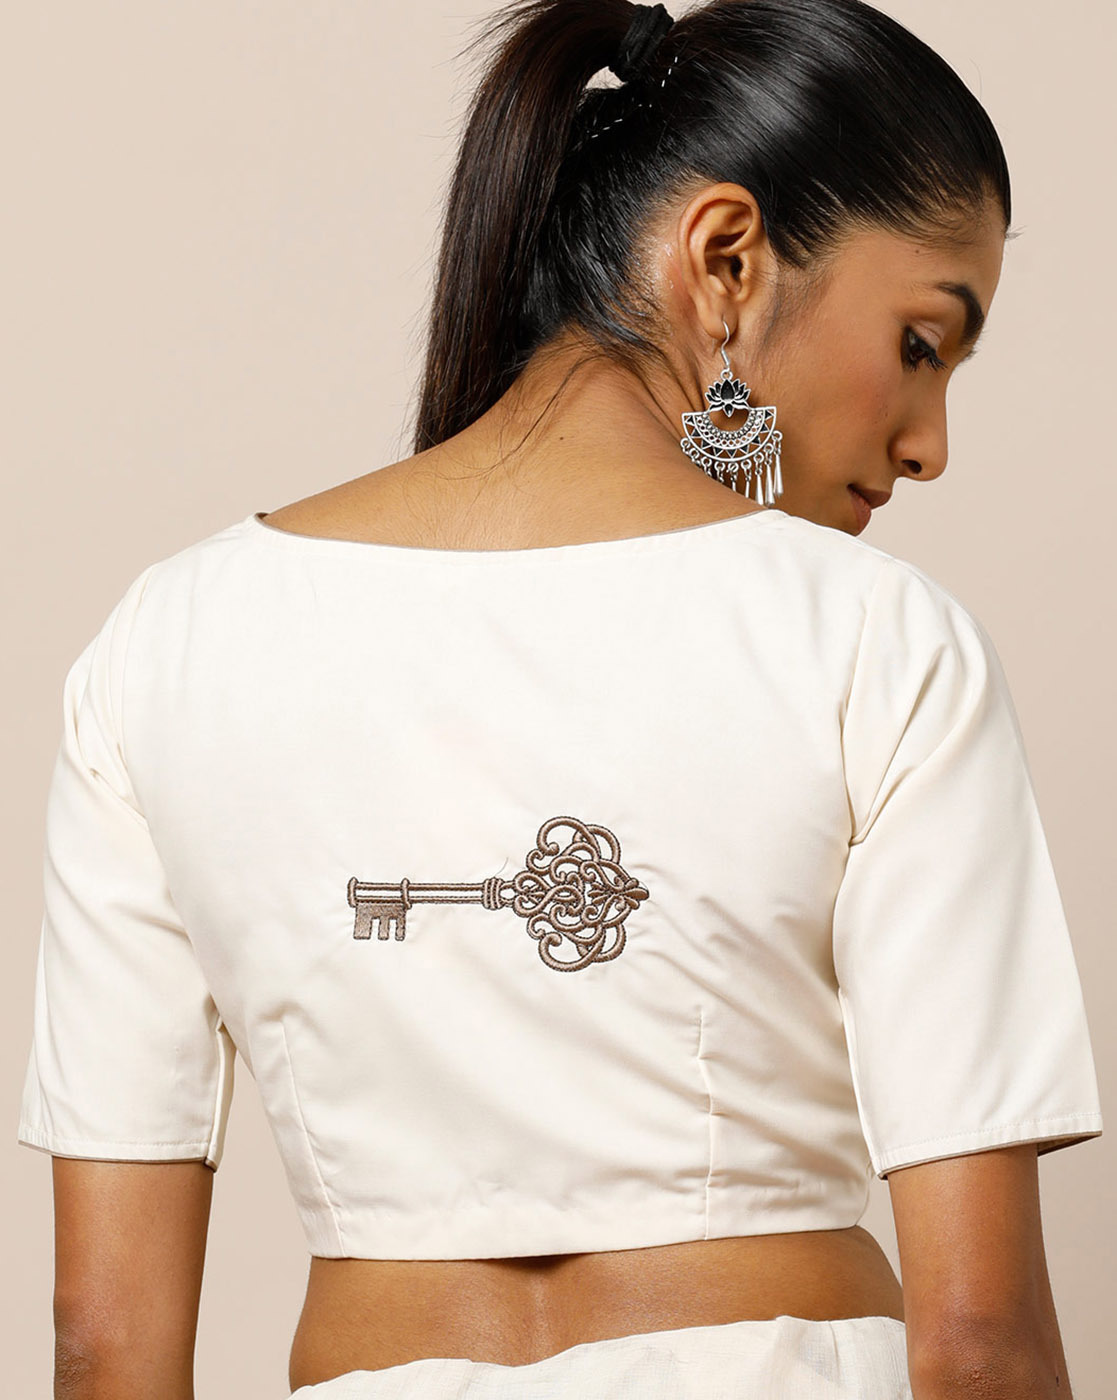 blouse-back-with-embroidery-designs-2019 (22)